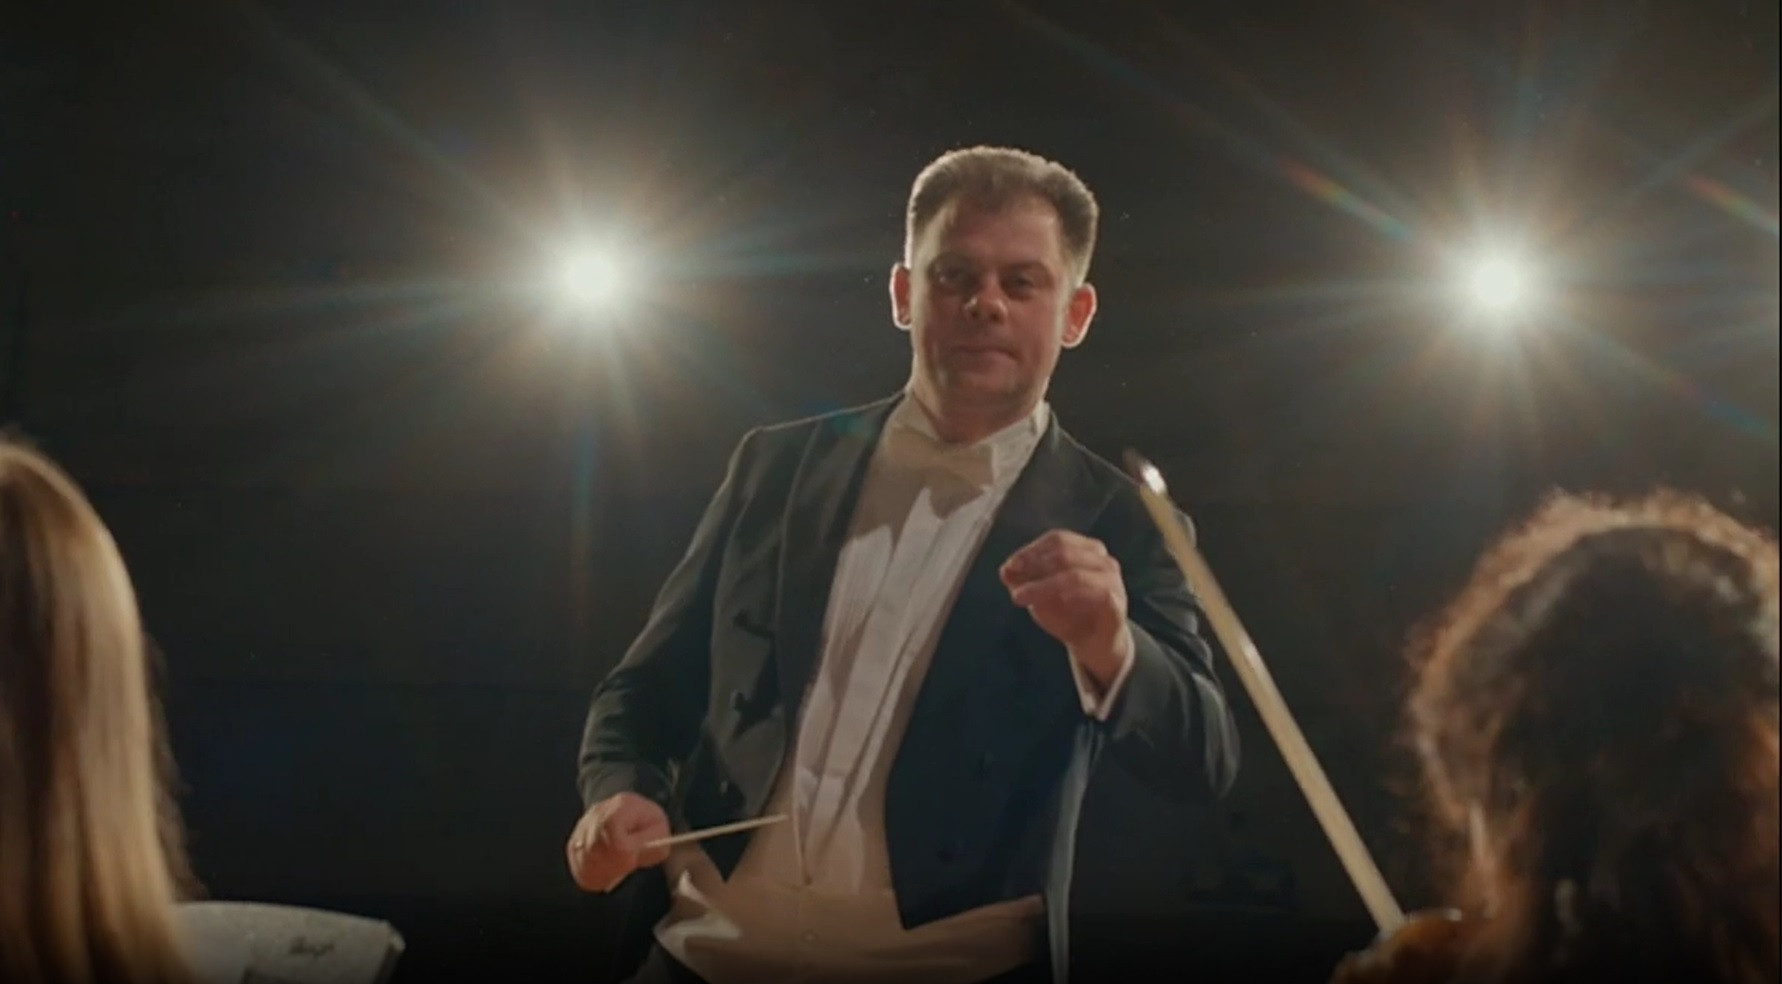 Russian conductor writes music for International University Sports Festival